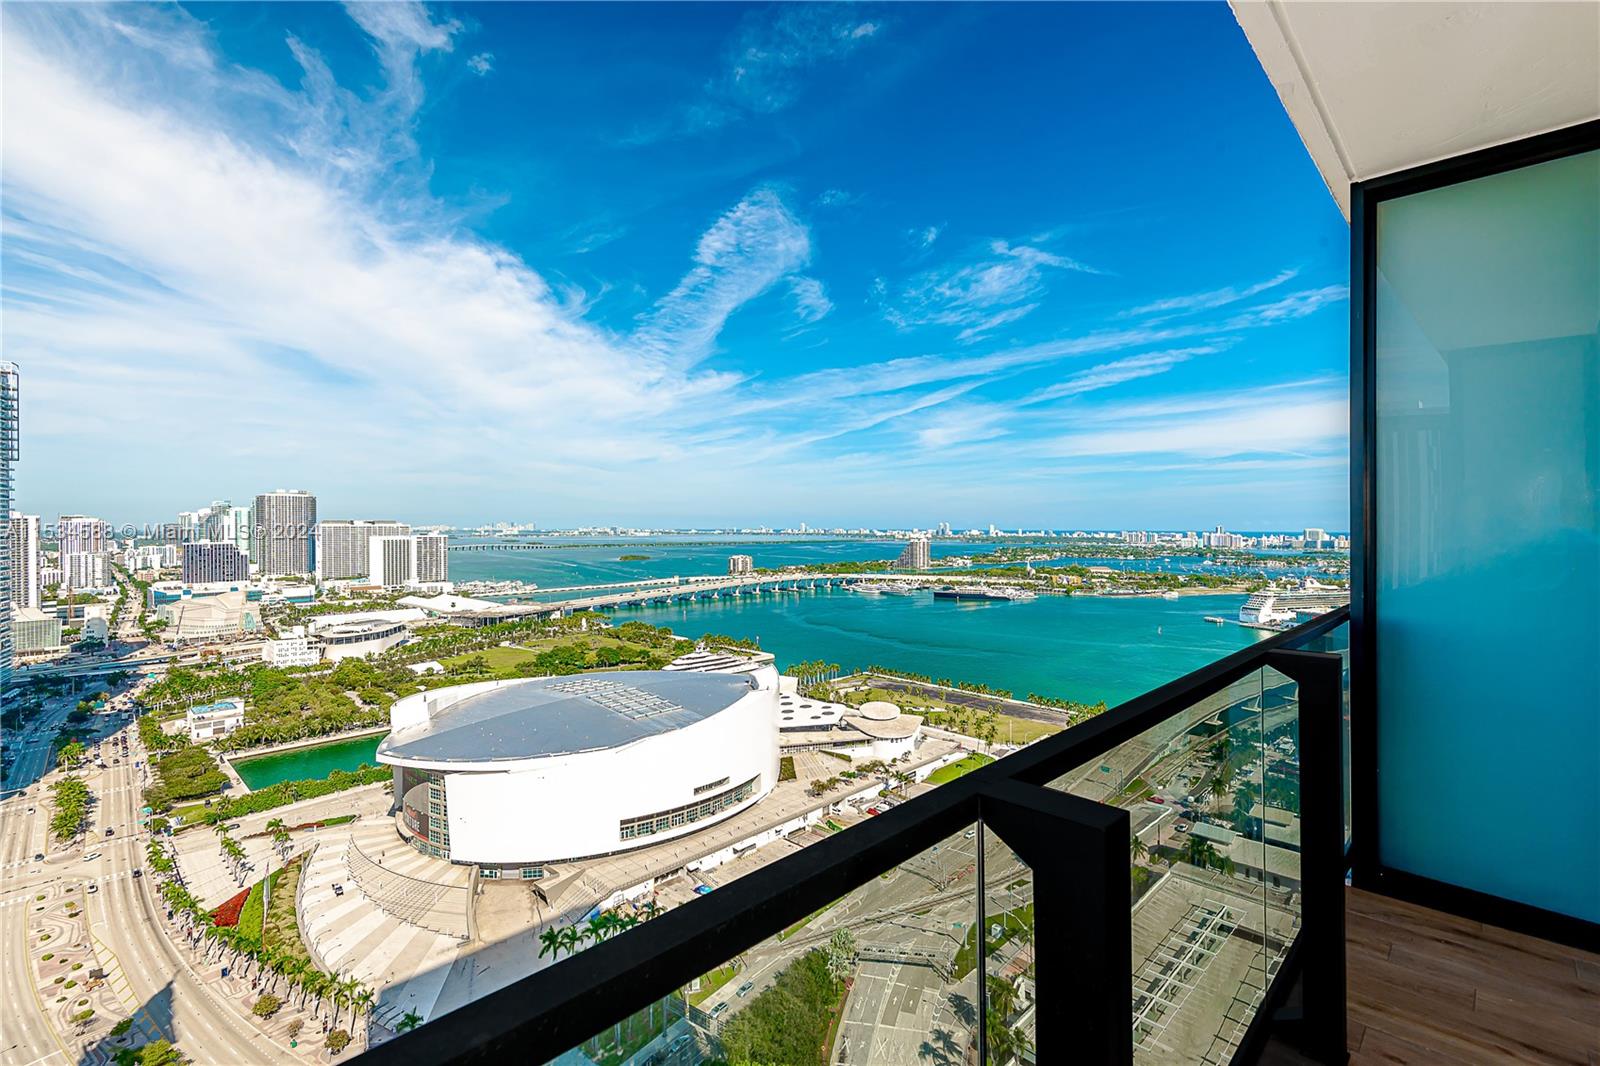 Indulge in luxury living with panoramic views of Biscayne Bay and Downtown Miami in this exquisite studio. Fully furnished, it includes a full kitchen, king-size bed, pull-out couch, washer/dryer, and a large flat-screen TV. Revel in amenities like a wraparound pool, two-story gym, valet parking, and more. Situated near Kaseya Center, Bayside Marketplace, major roads, Port of Miami, Brightline train station, and public parks, this condo epitomizes convenience and comfort.